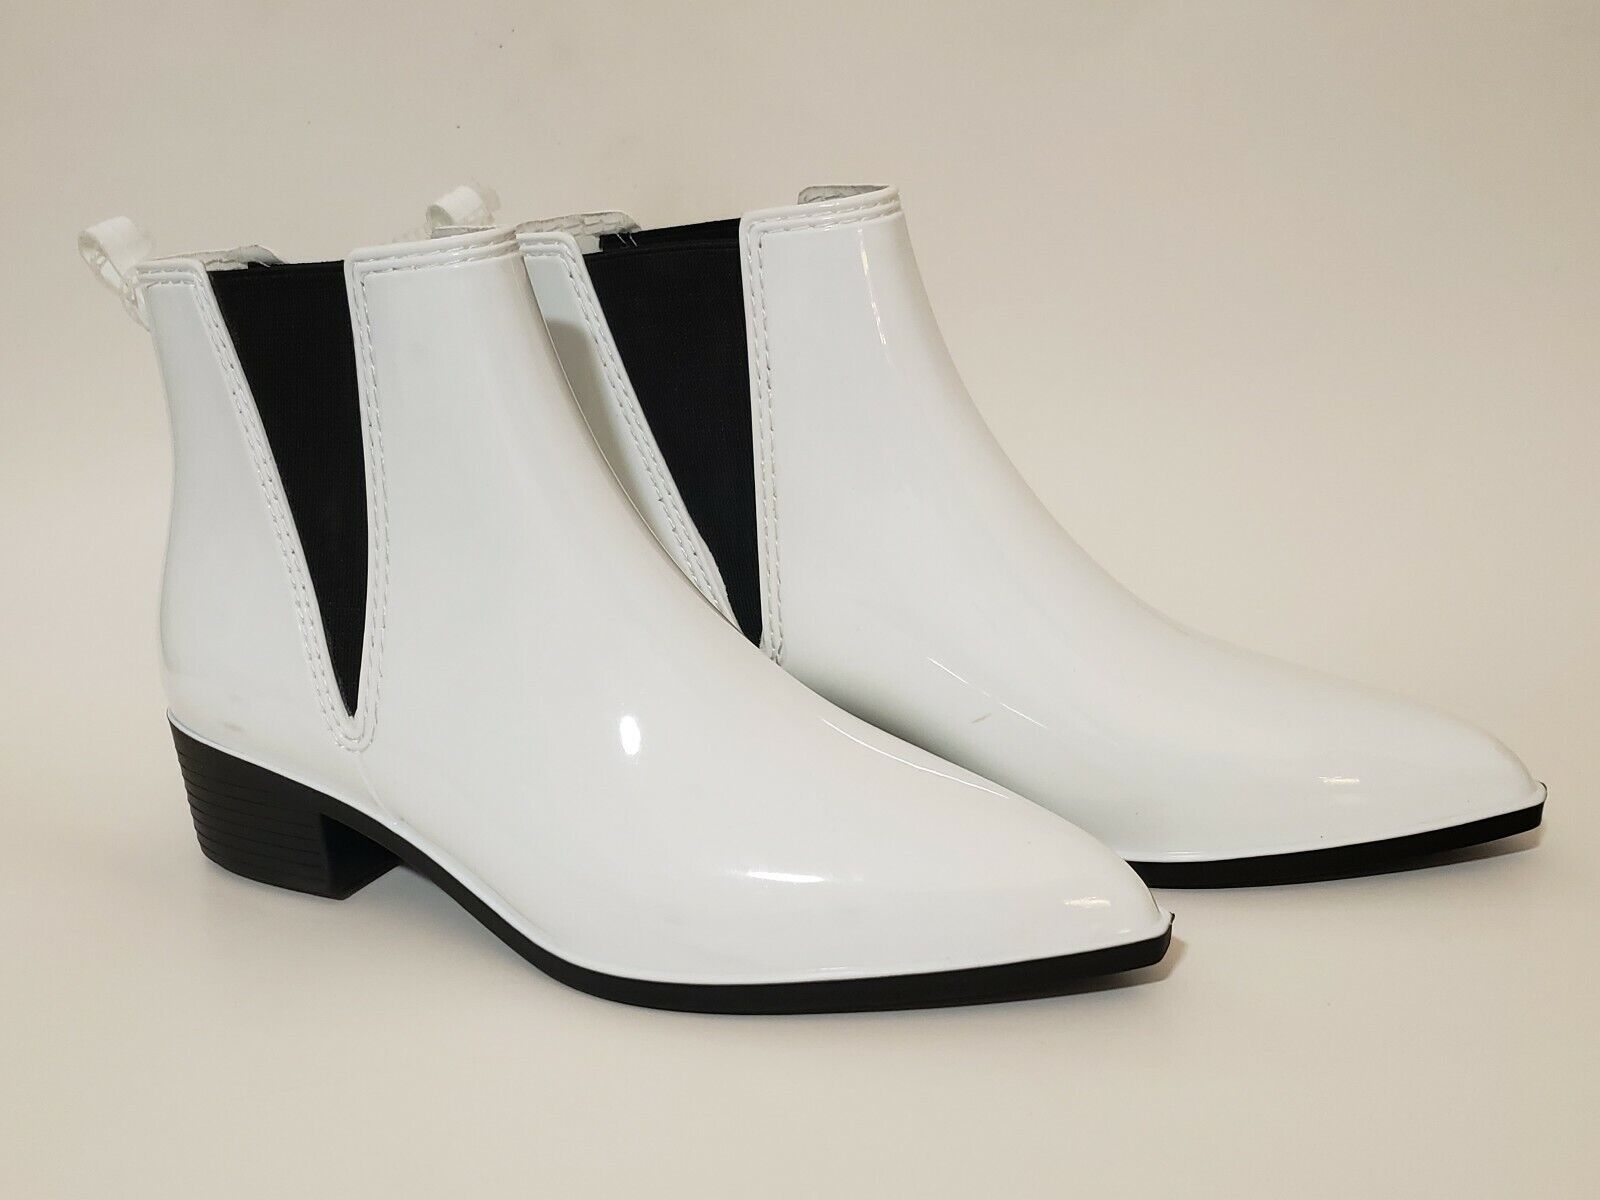 NEW Cheap mail order specialty store Jeffrey Campbell Translated White Chelsea-Style Waterproof Rain Bo Mist